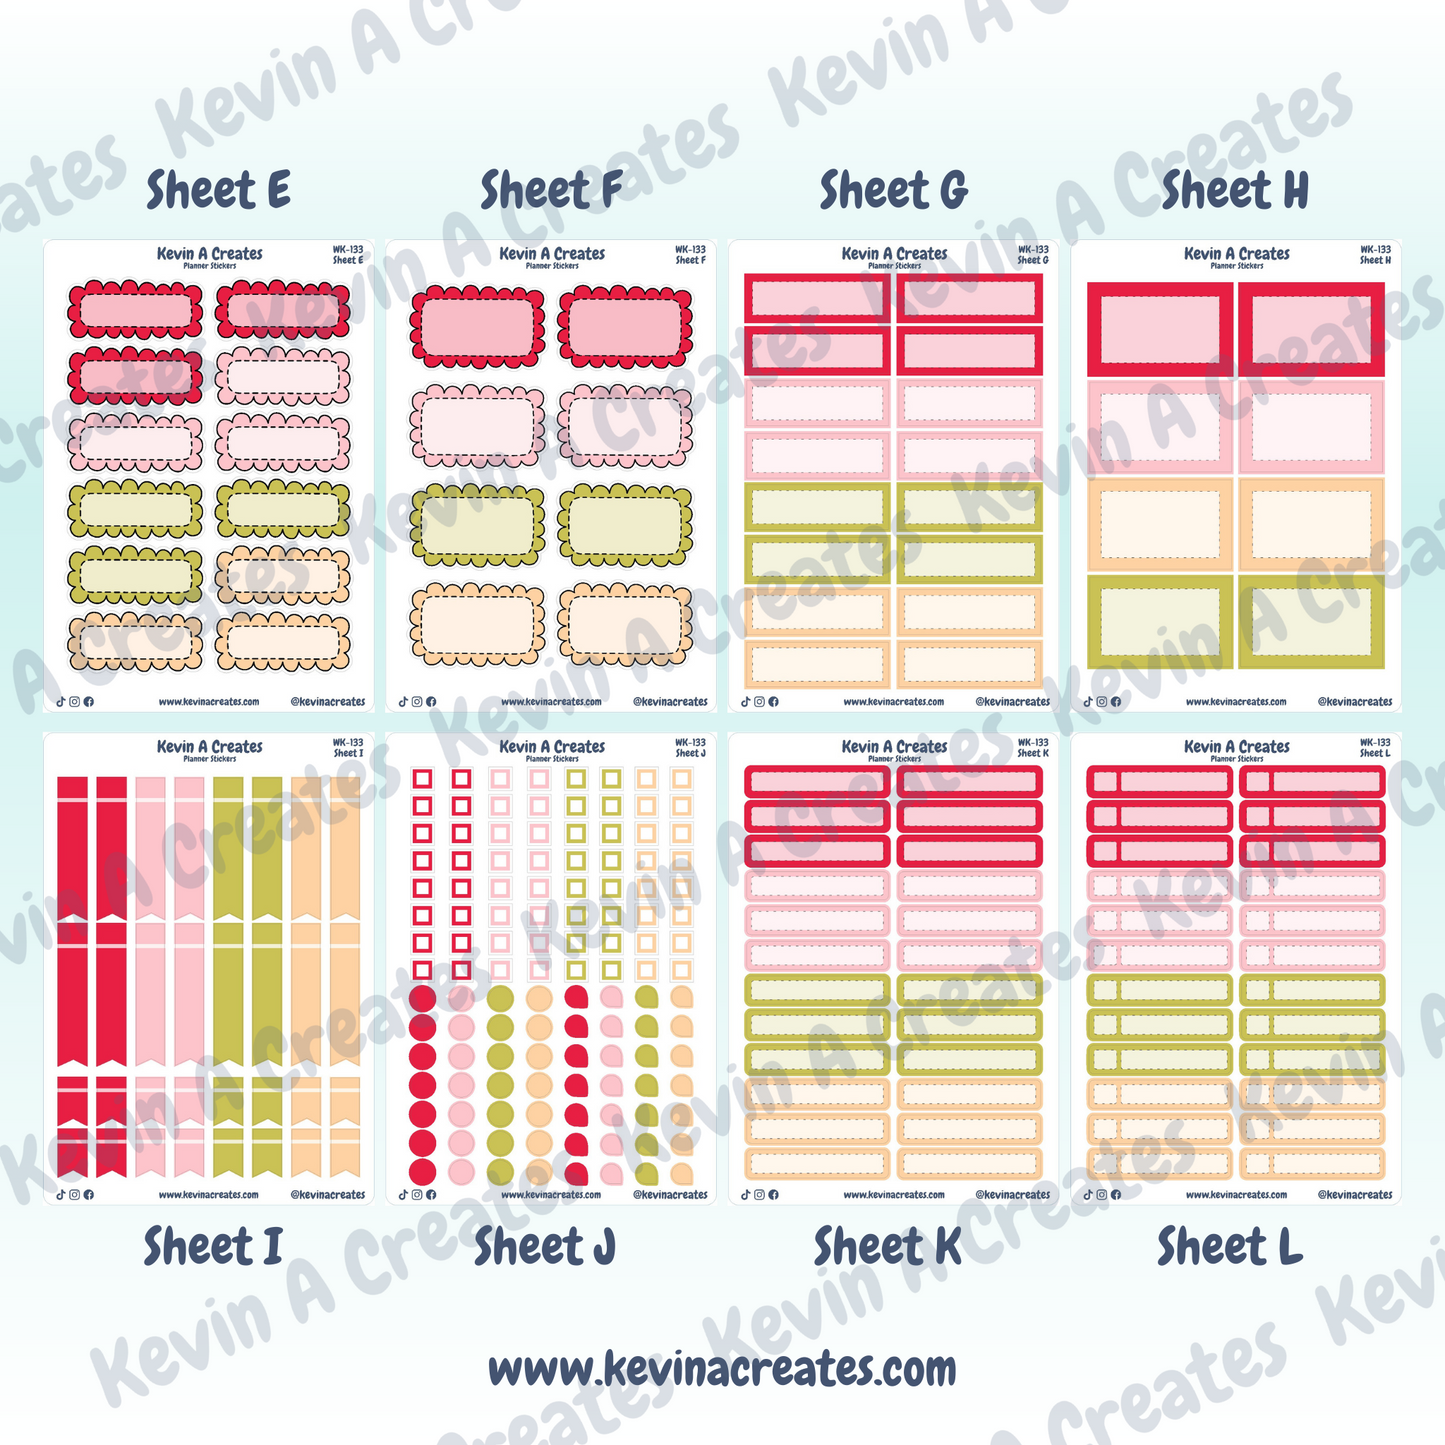 WK-133, Weekly Planner Stickers, Vertical Layout